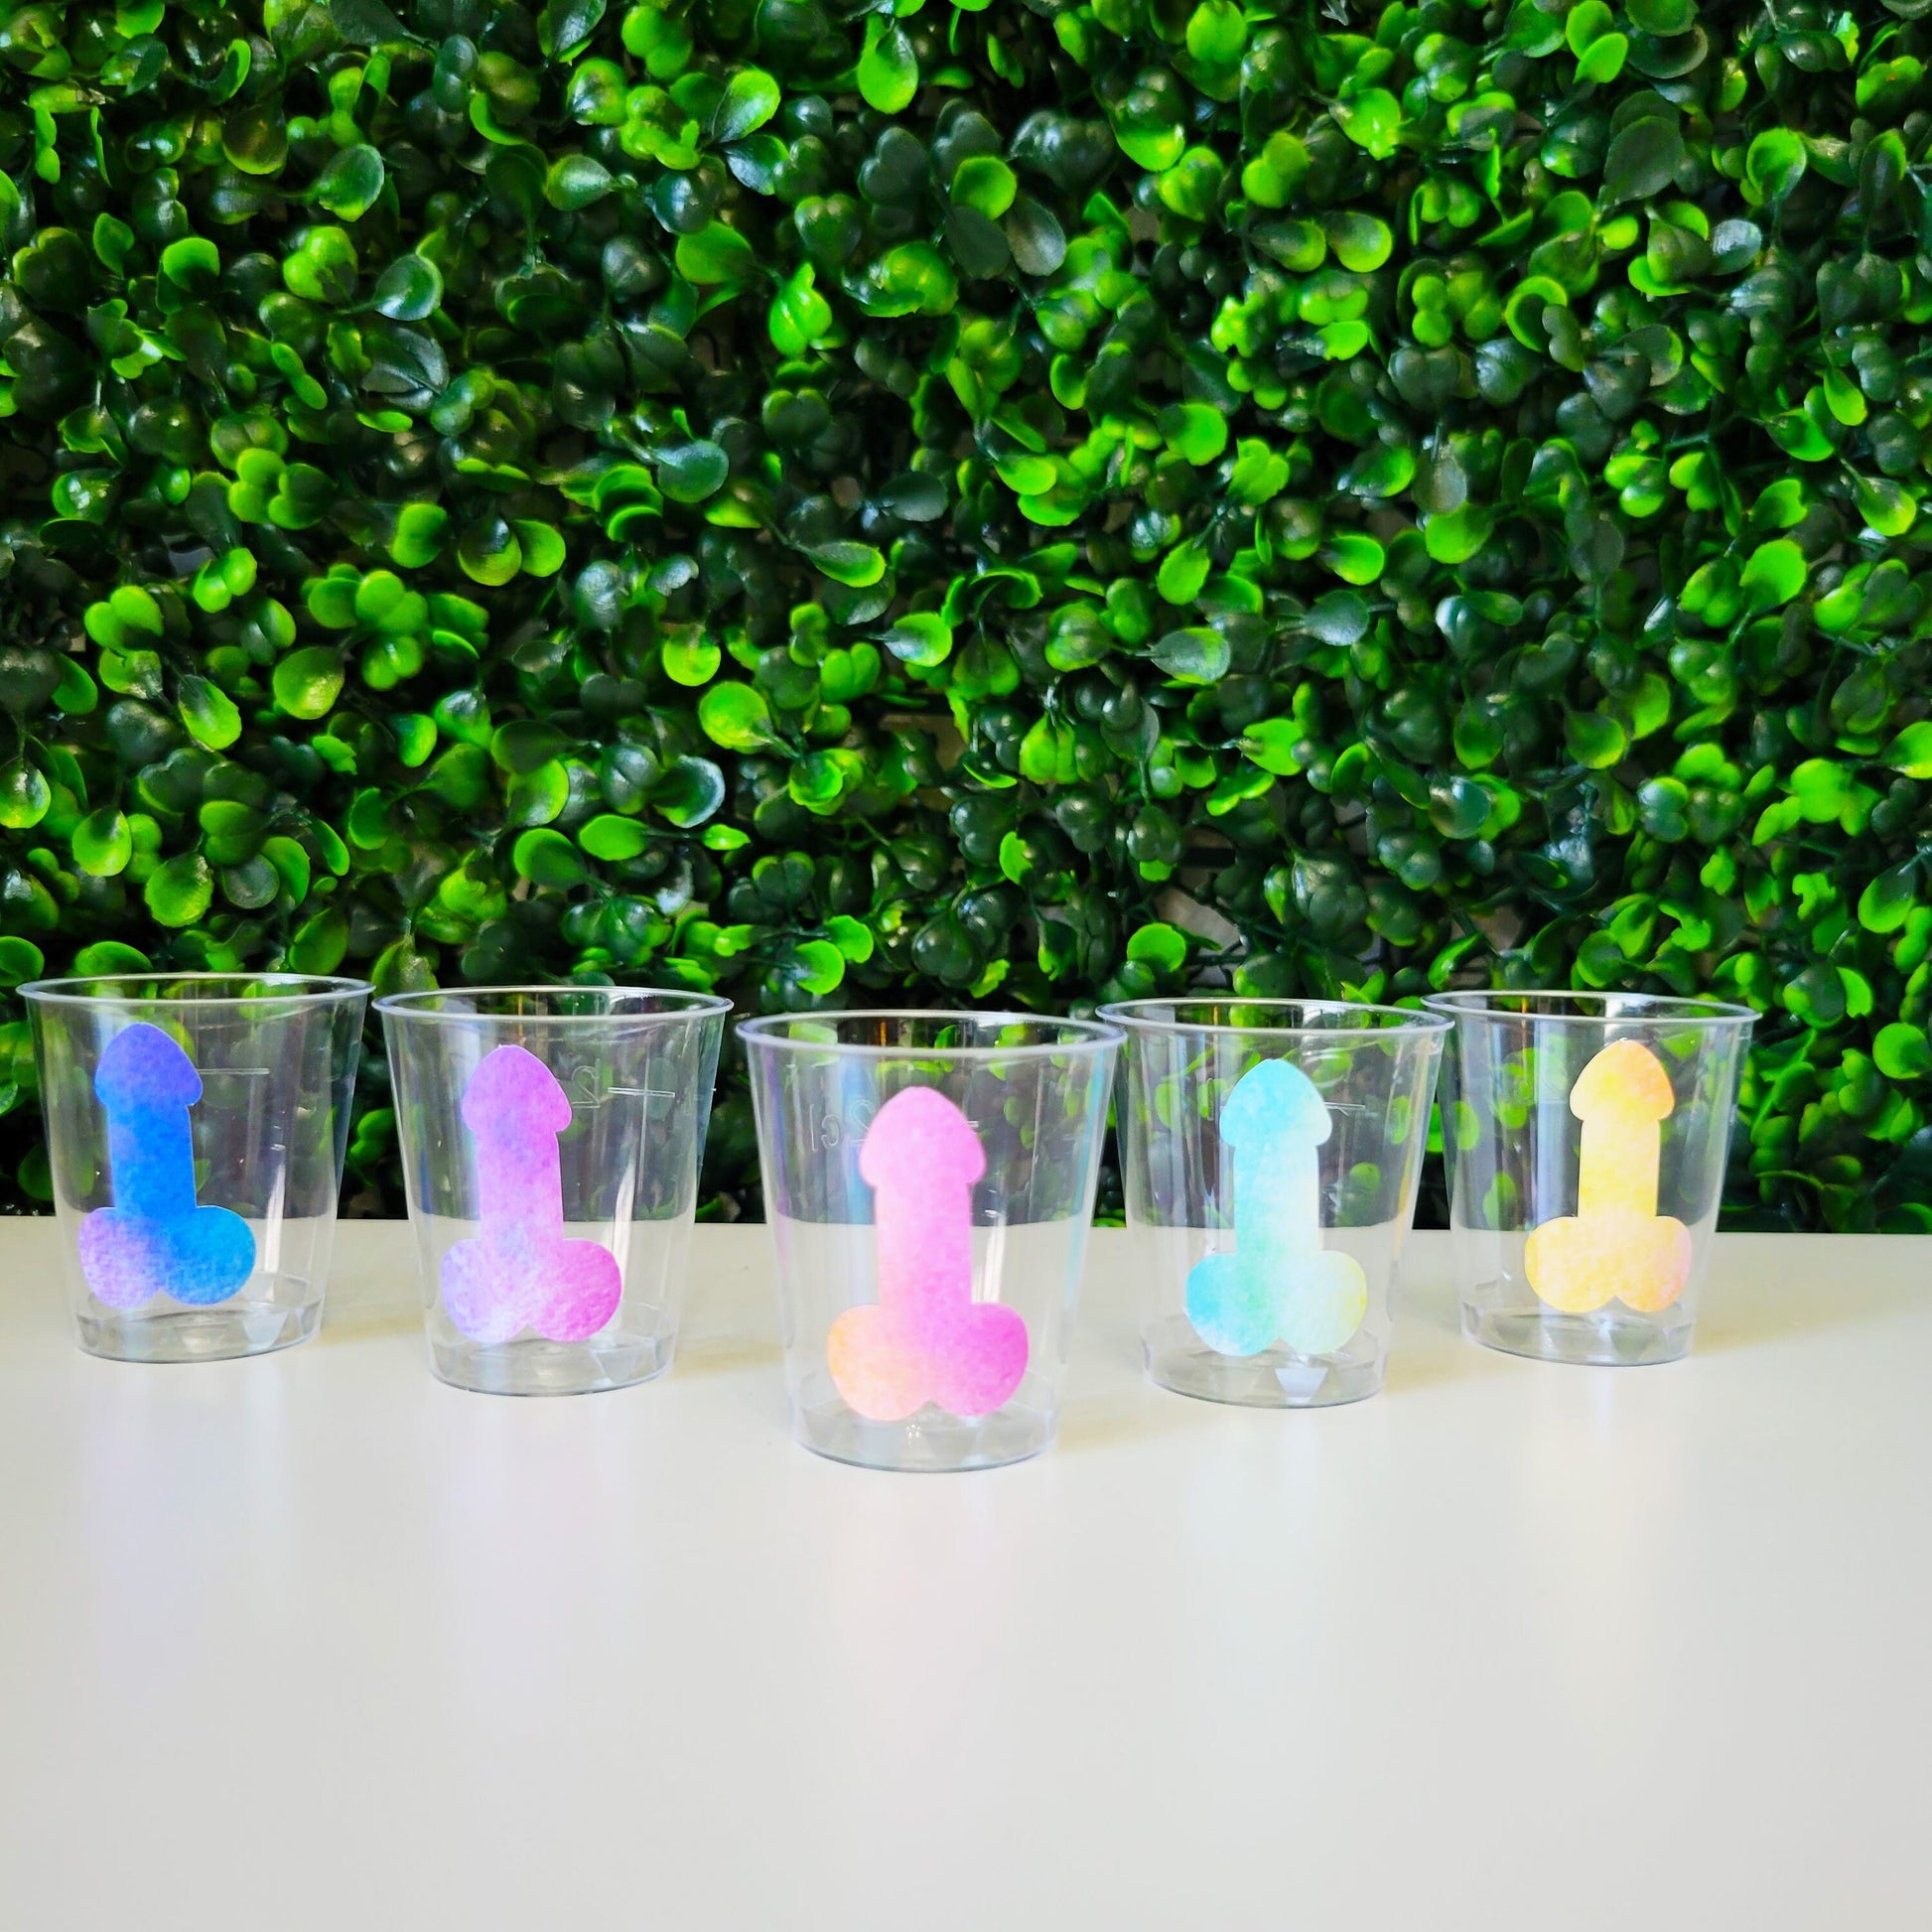 Green Plastic Shot Cups, Bachelor Party Cups, Bachelor Party